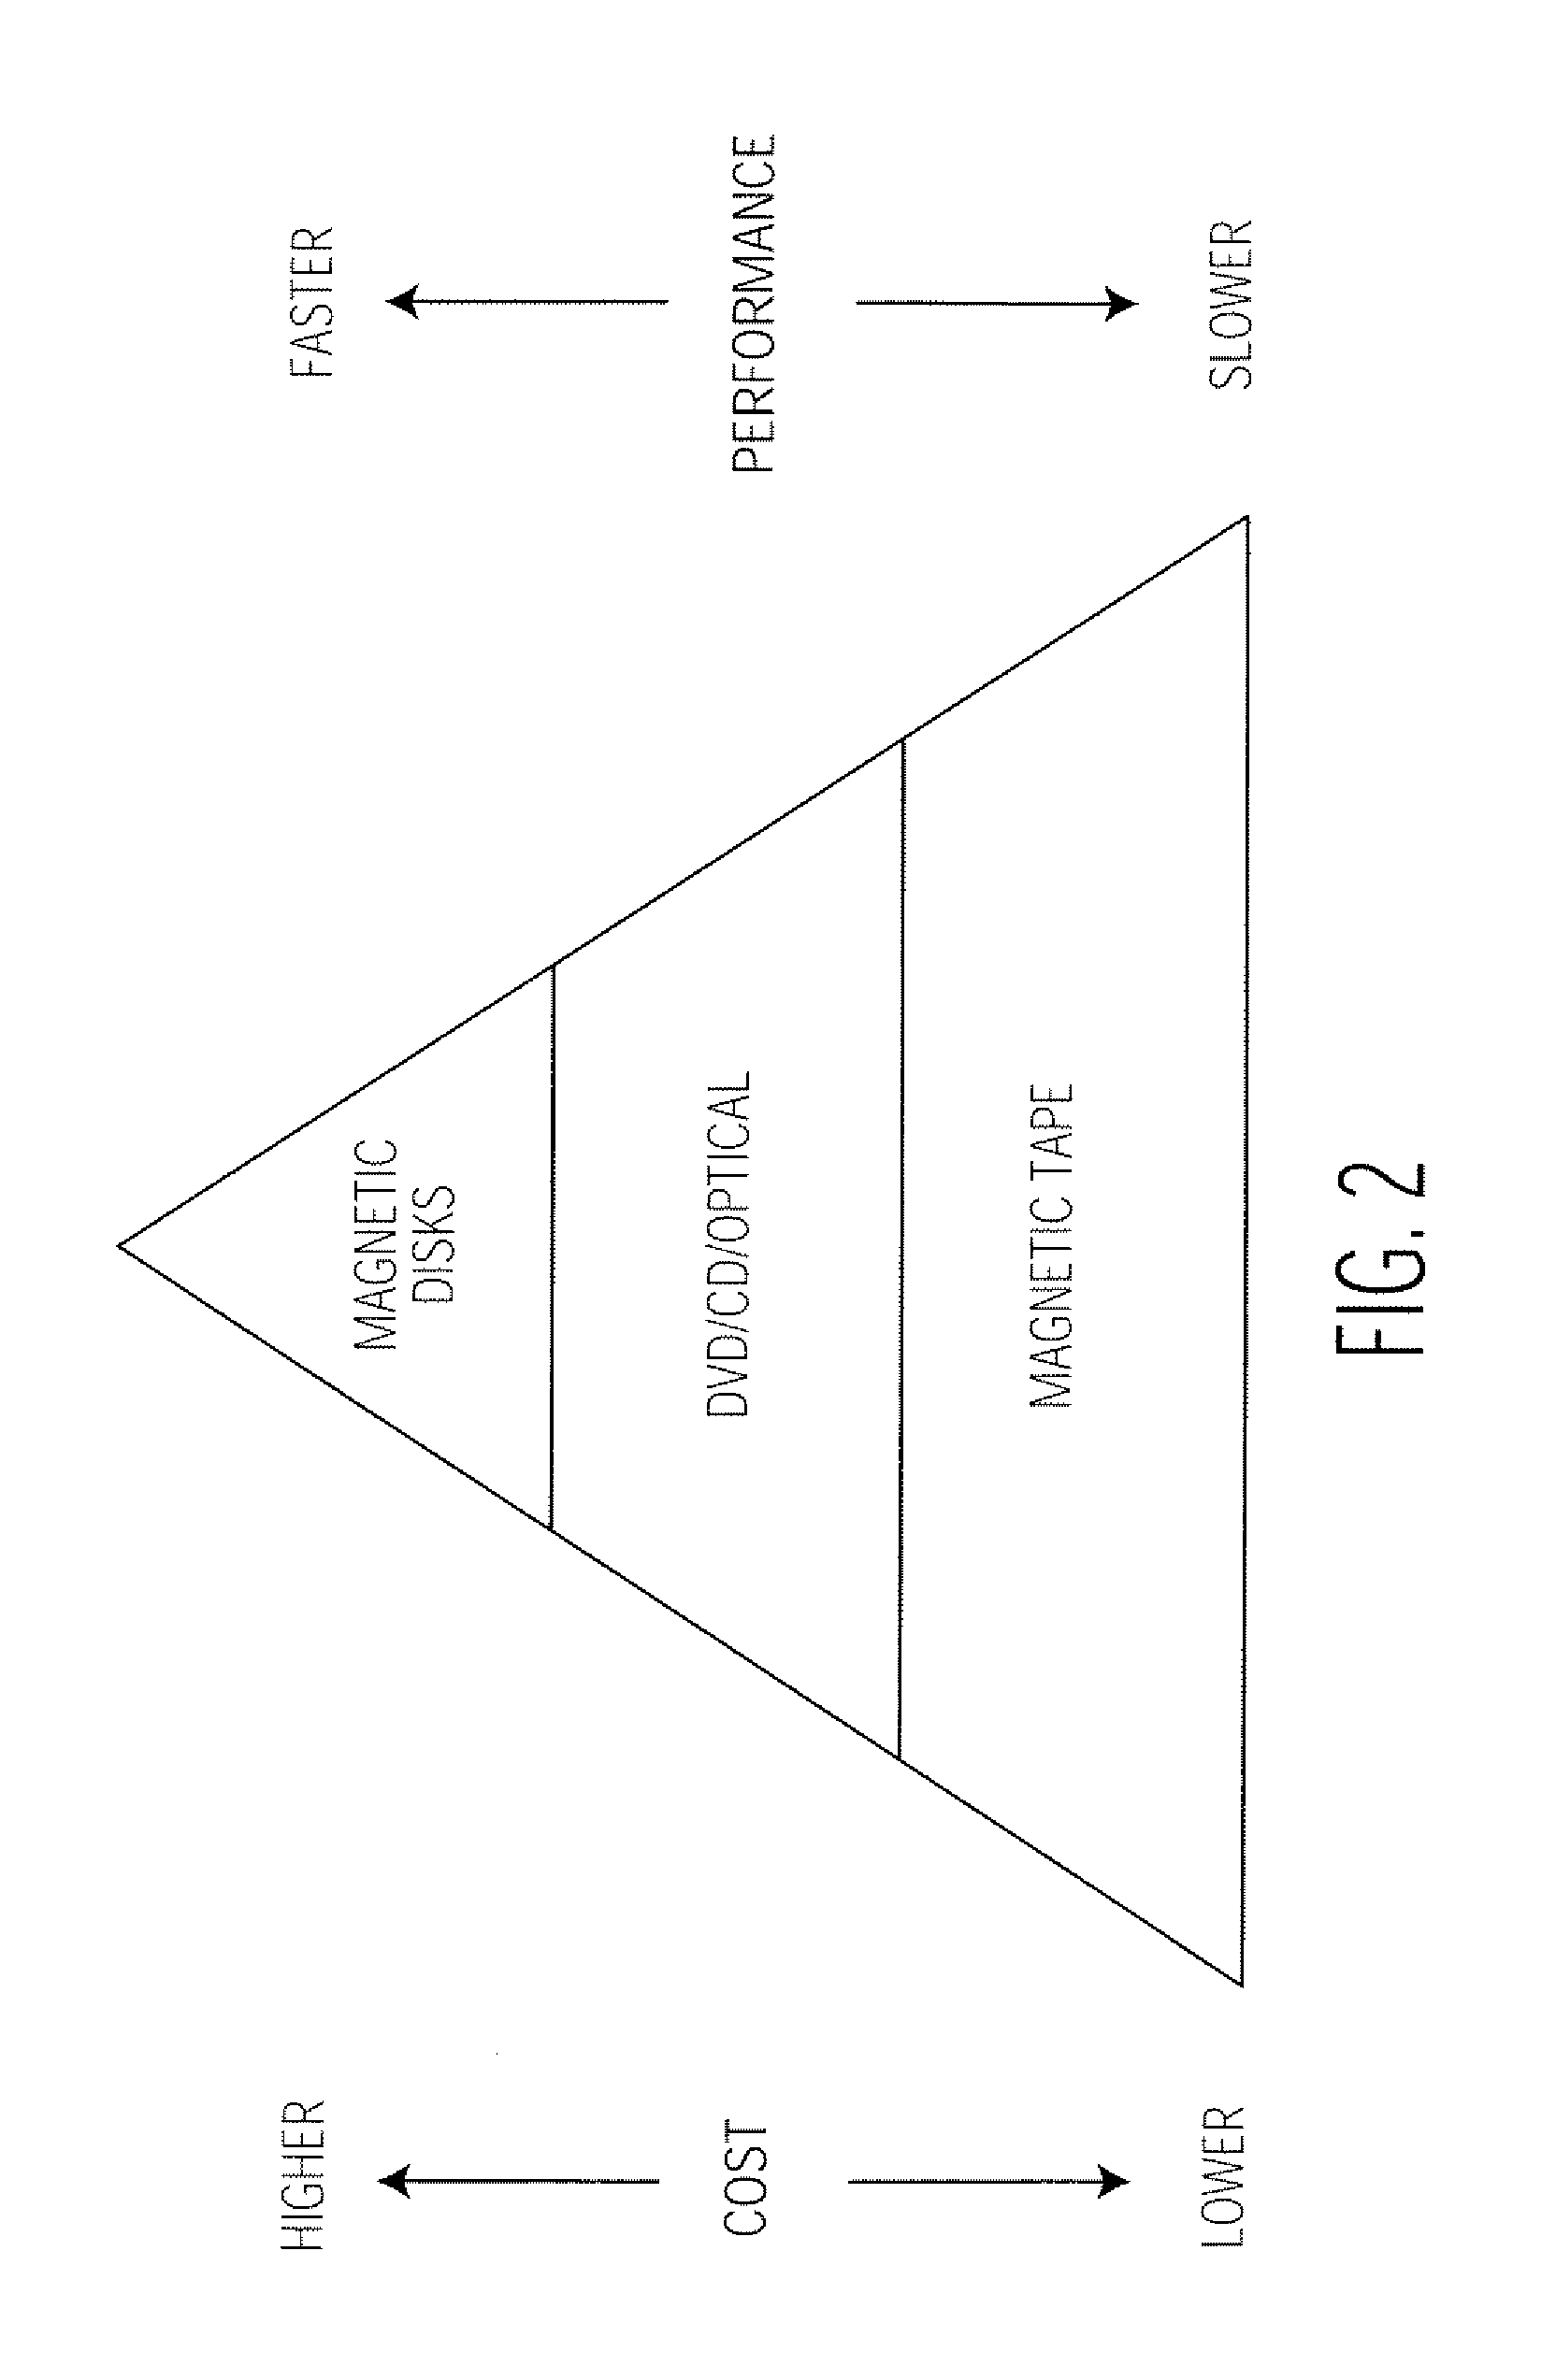 System for managing object storage and retrieval in partitioned storage media